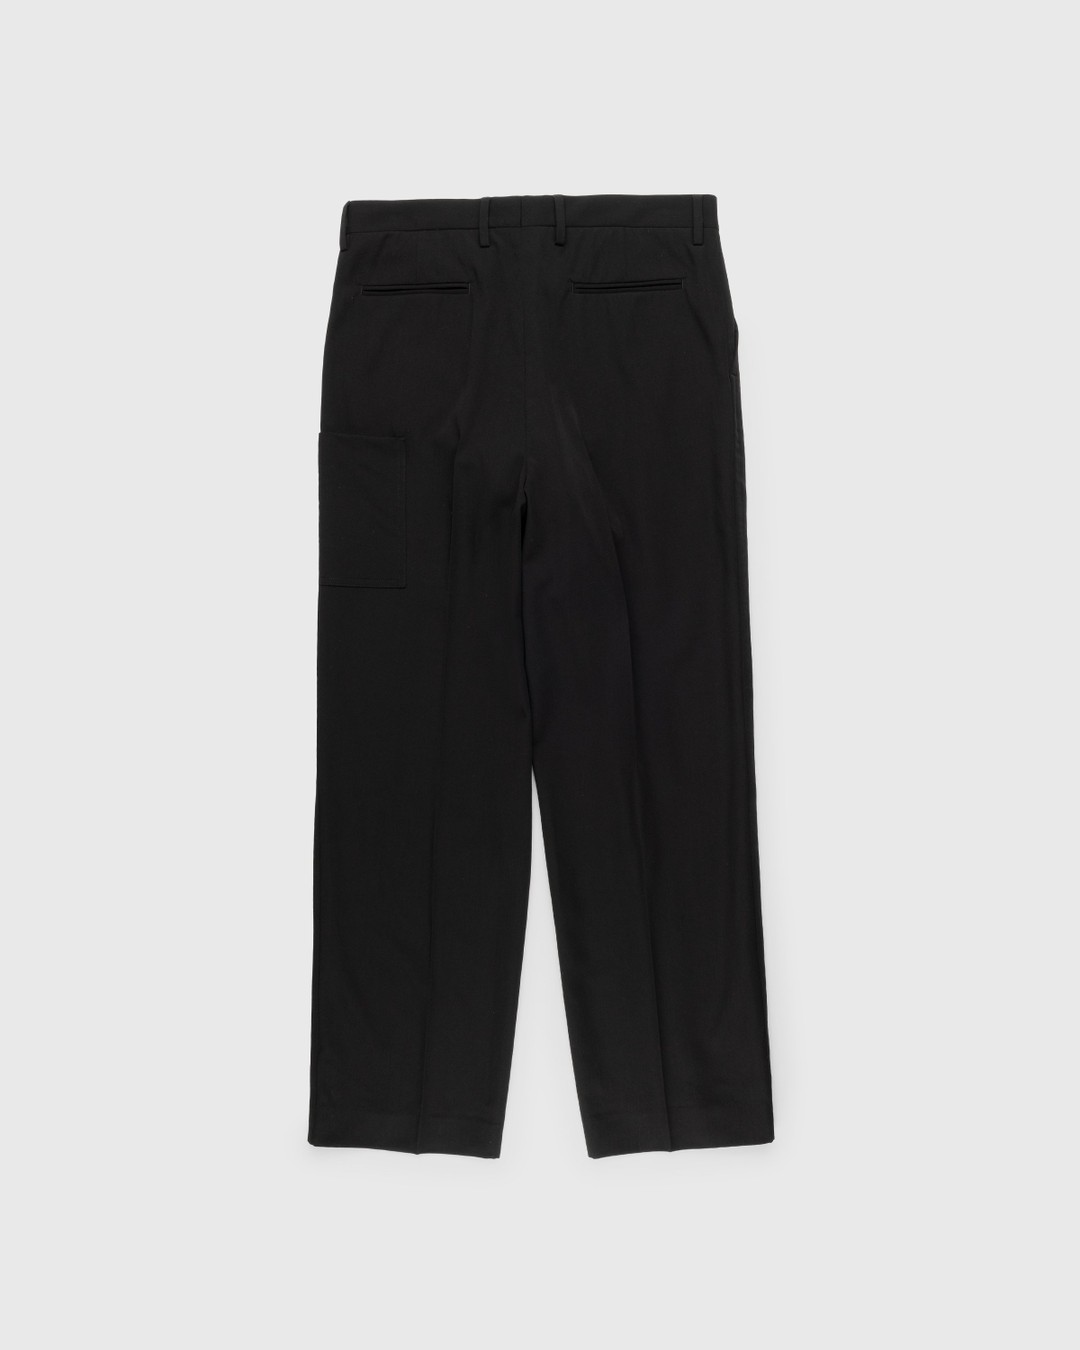 Diomene by Damir Doma – Classic pants Meteorite - Trousers - Black - Image 2